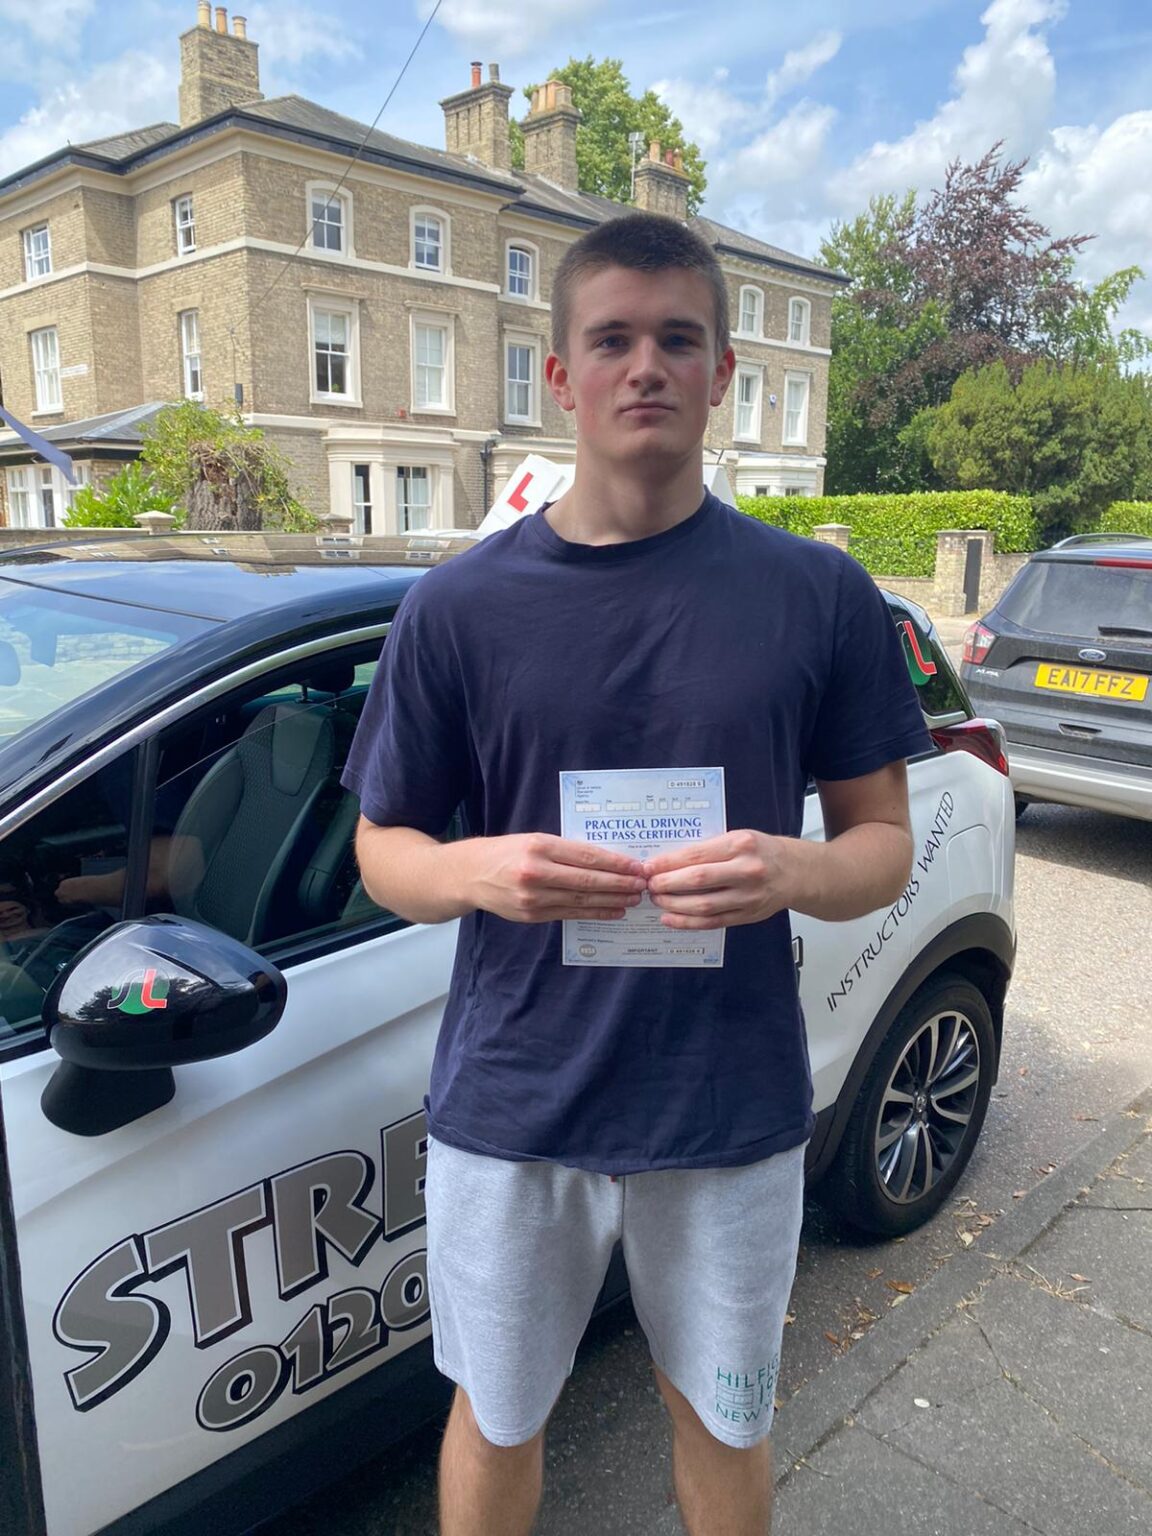 Congratulations On Passing Your Test Today Tom Enjoy The Freedom And Stay Safe On The Roads 